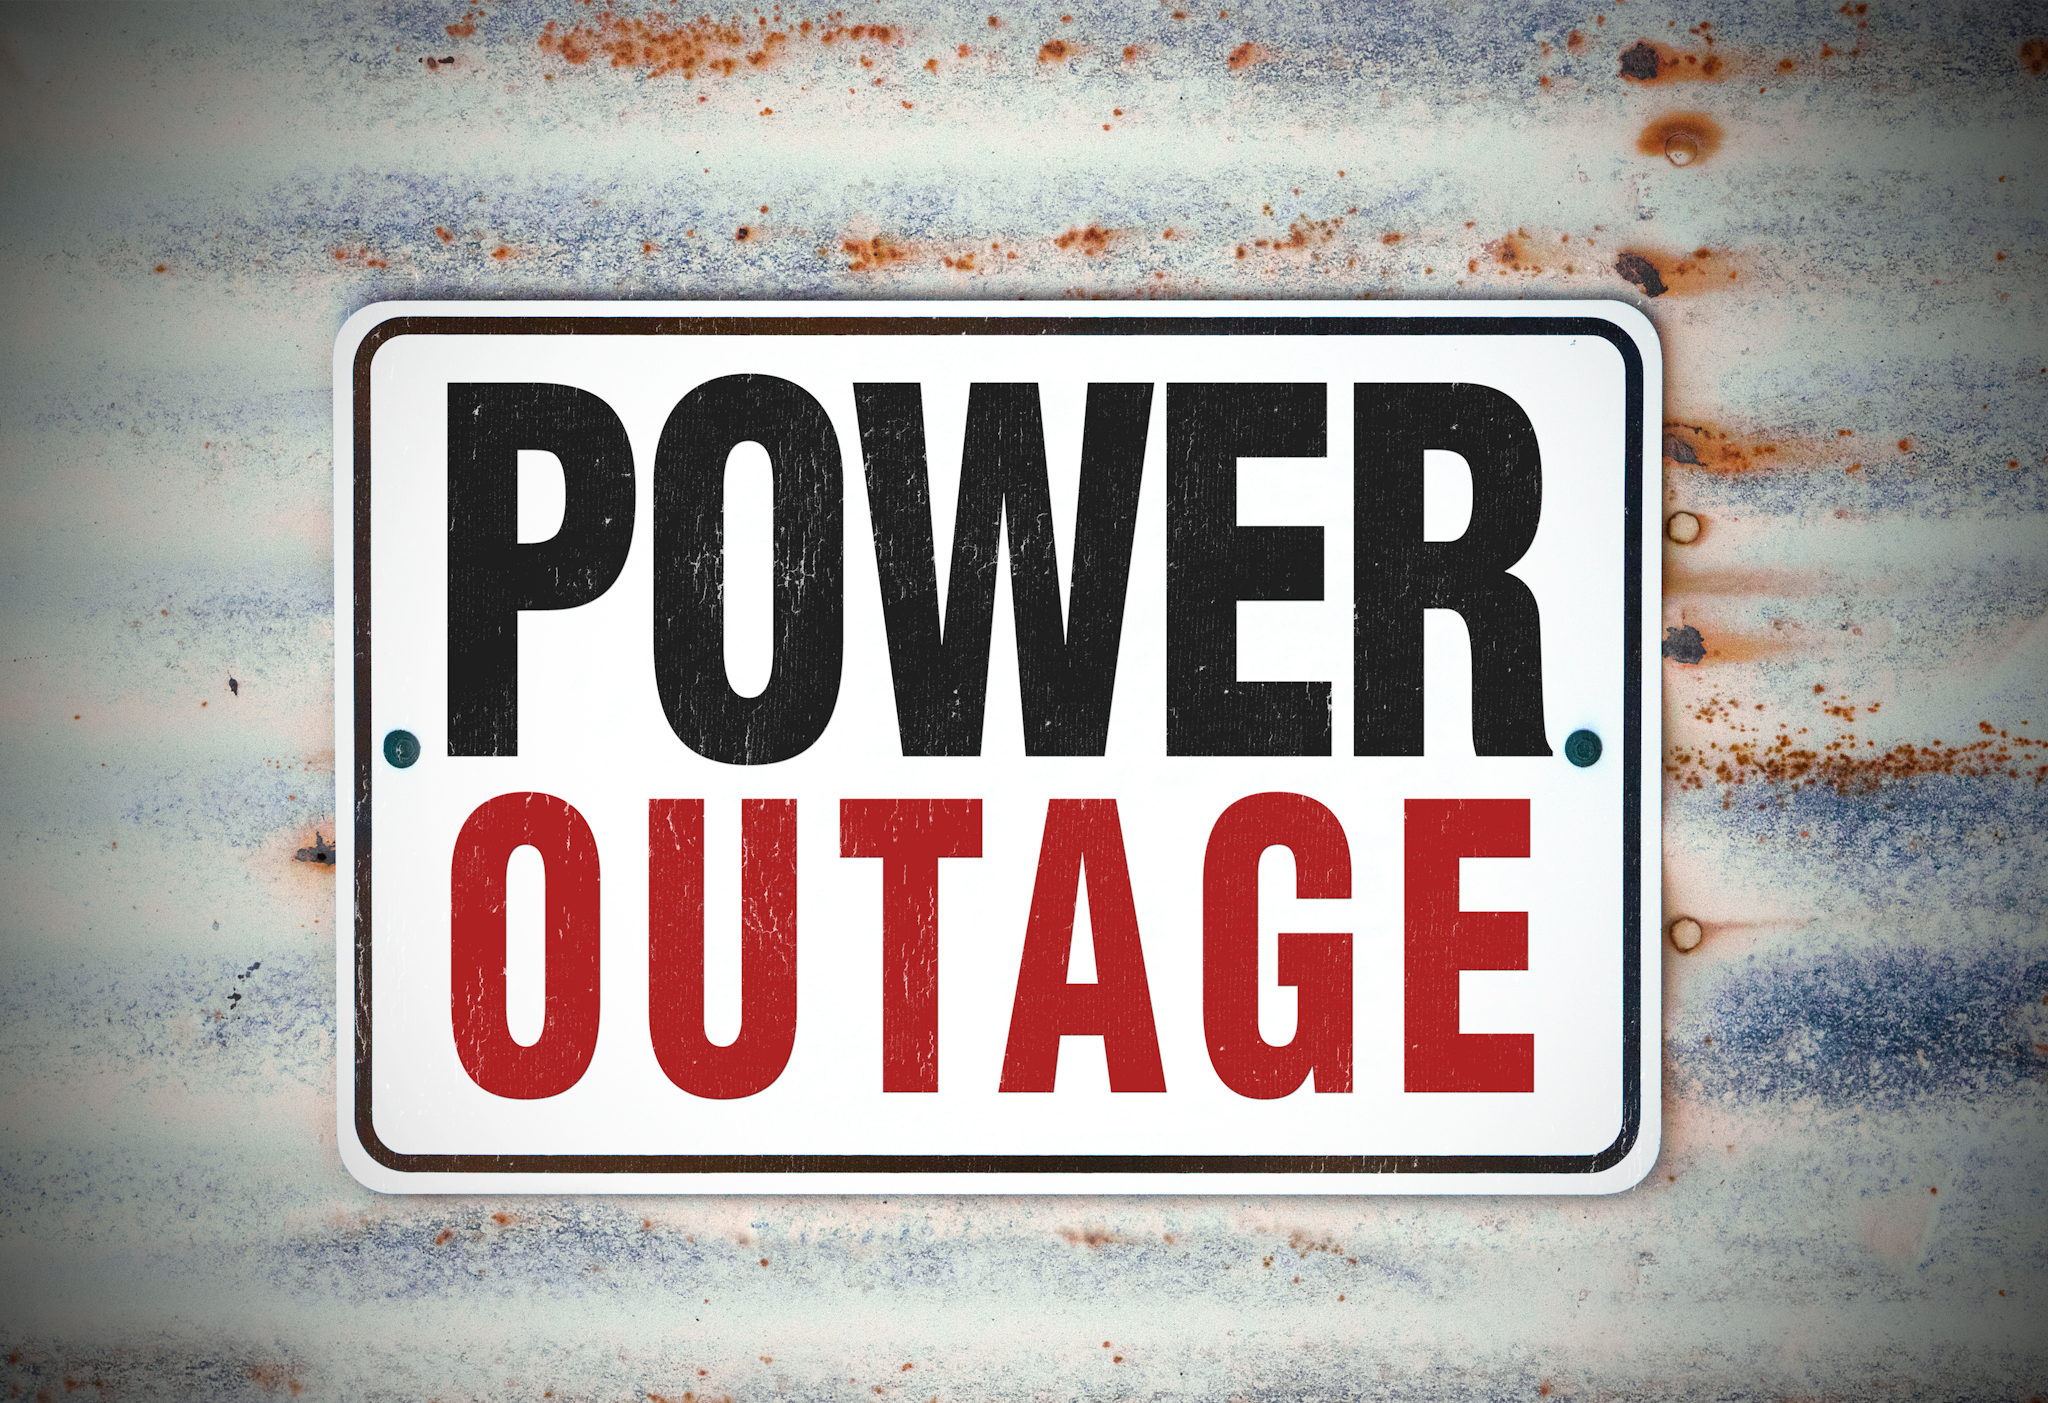 A photo of a power outage sign